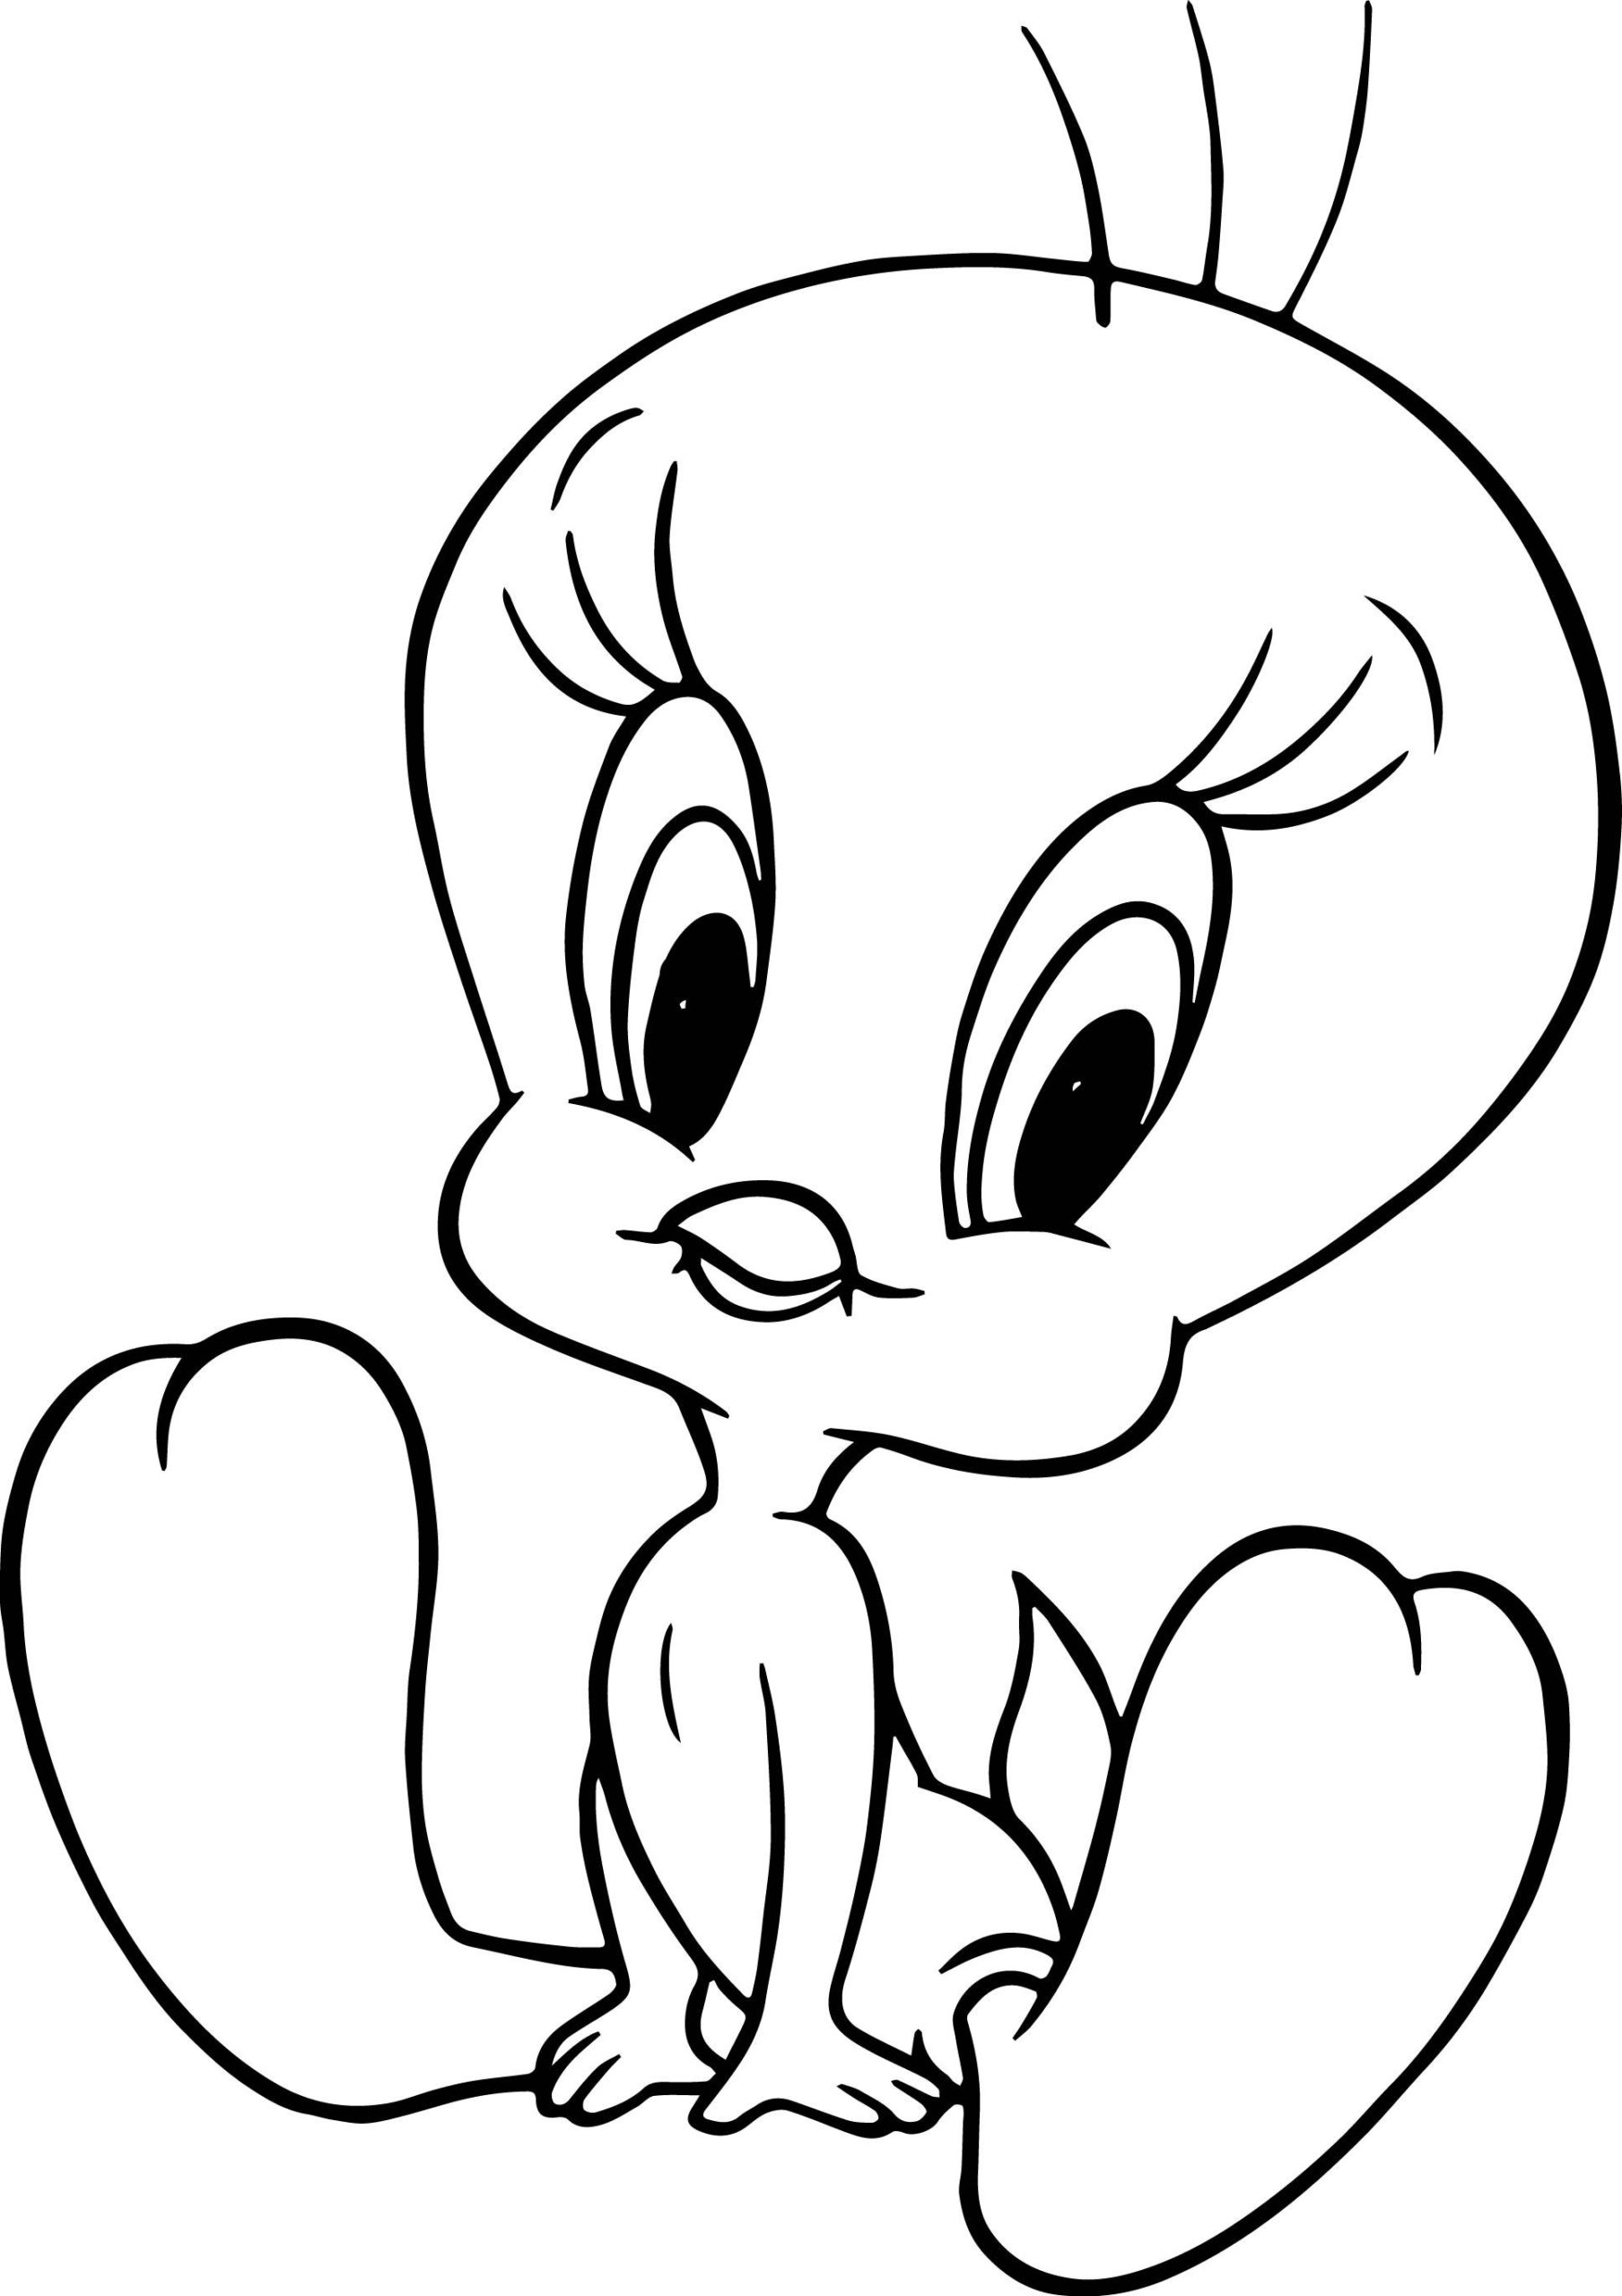 Tweety Bird Coloring Pages - Visual Arts Ideas